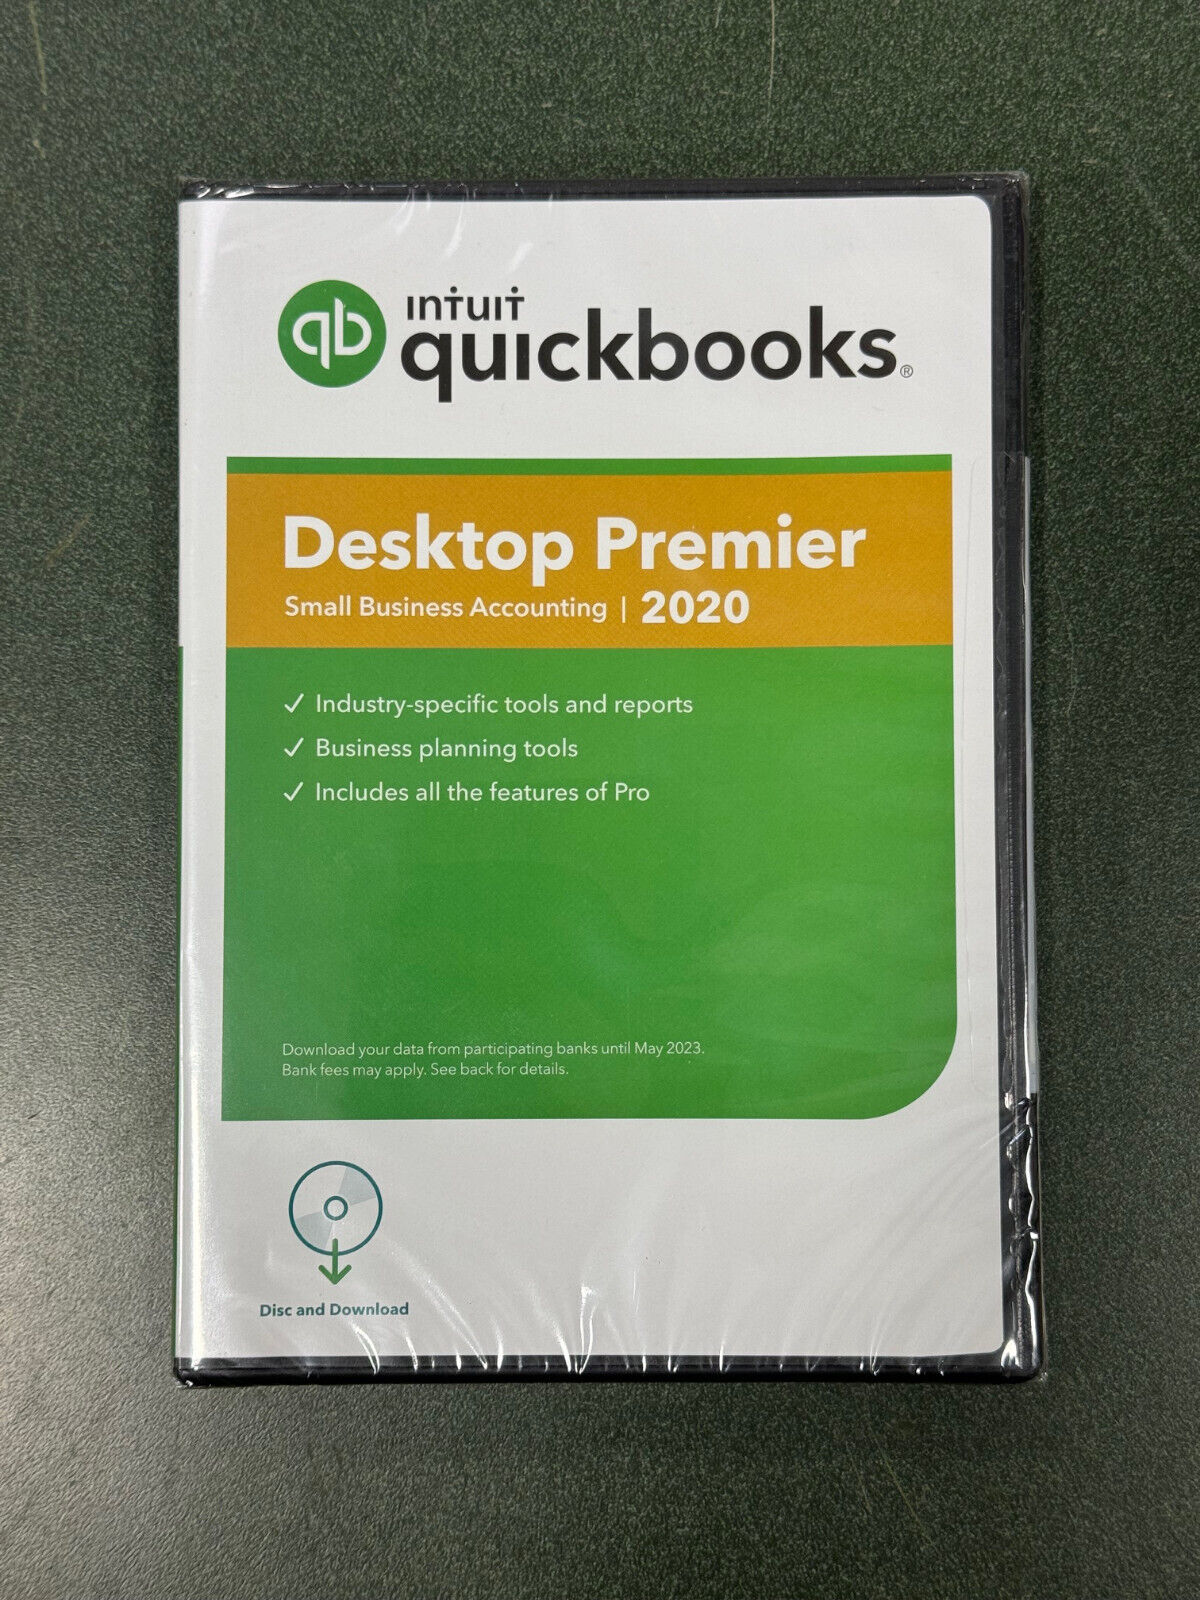 Intuit Quickbooks Desktop Premier Small Business Accounting 2020 for Windows